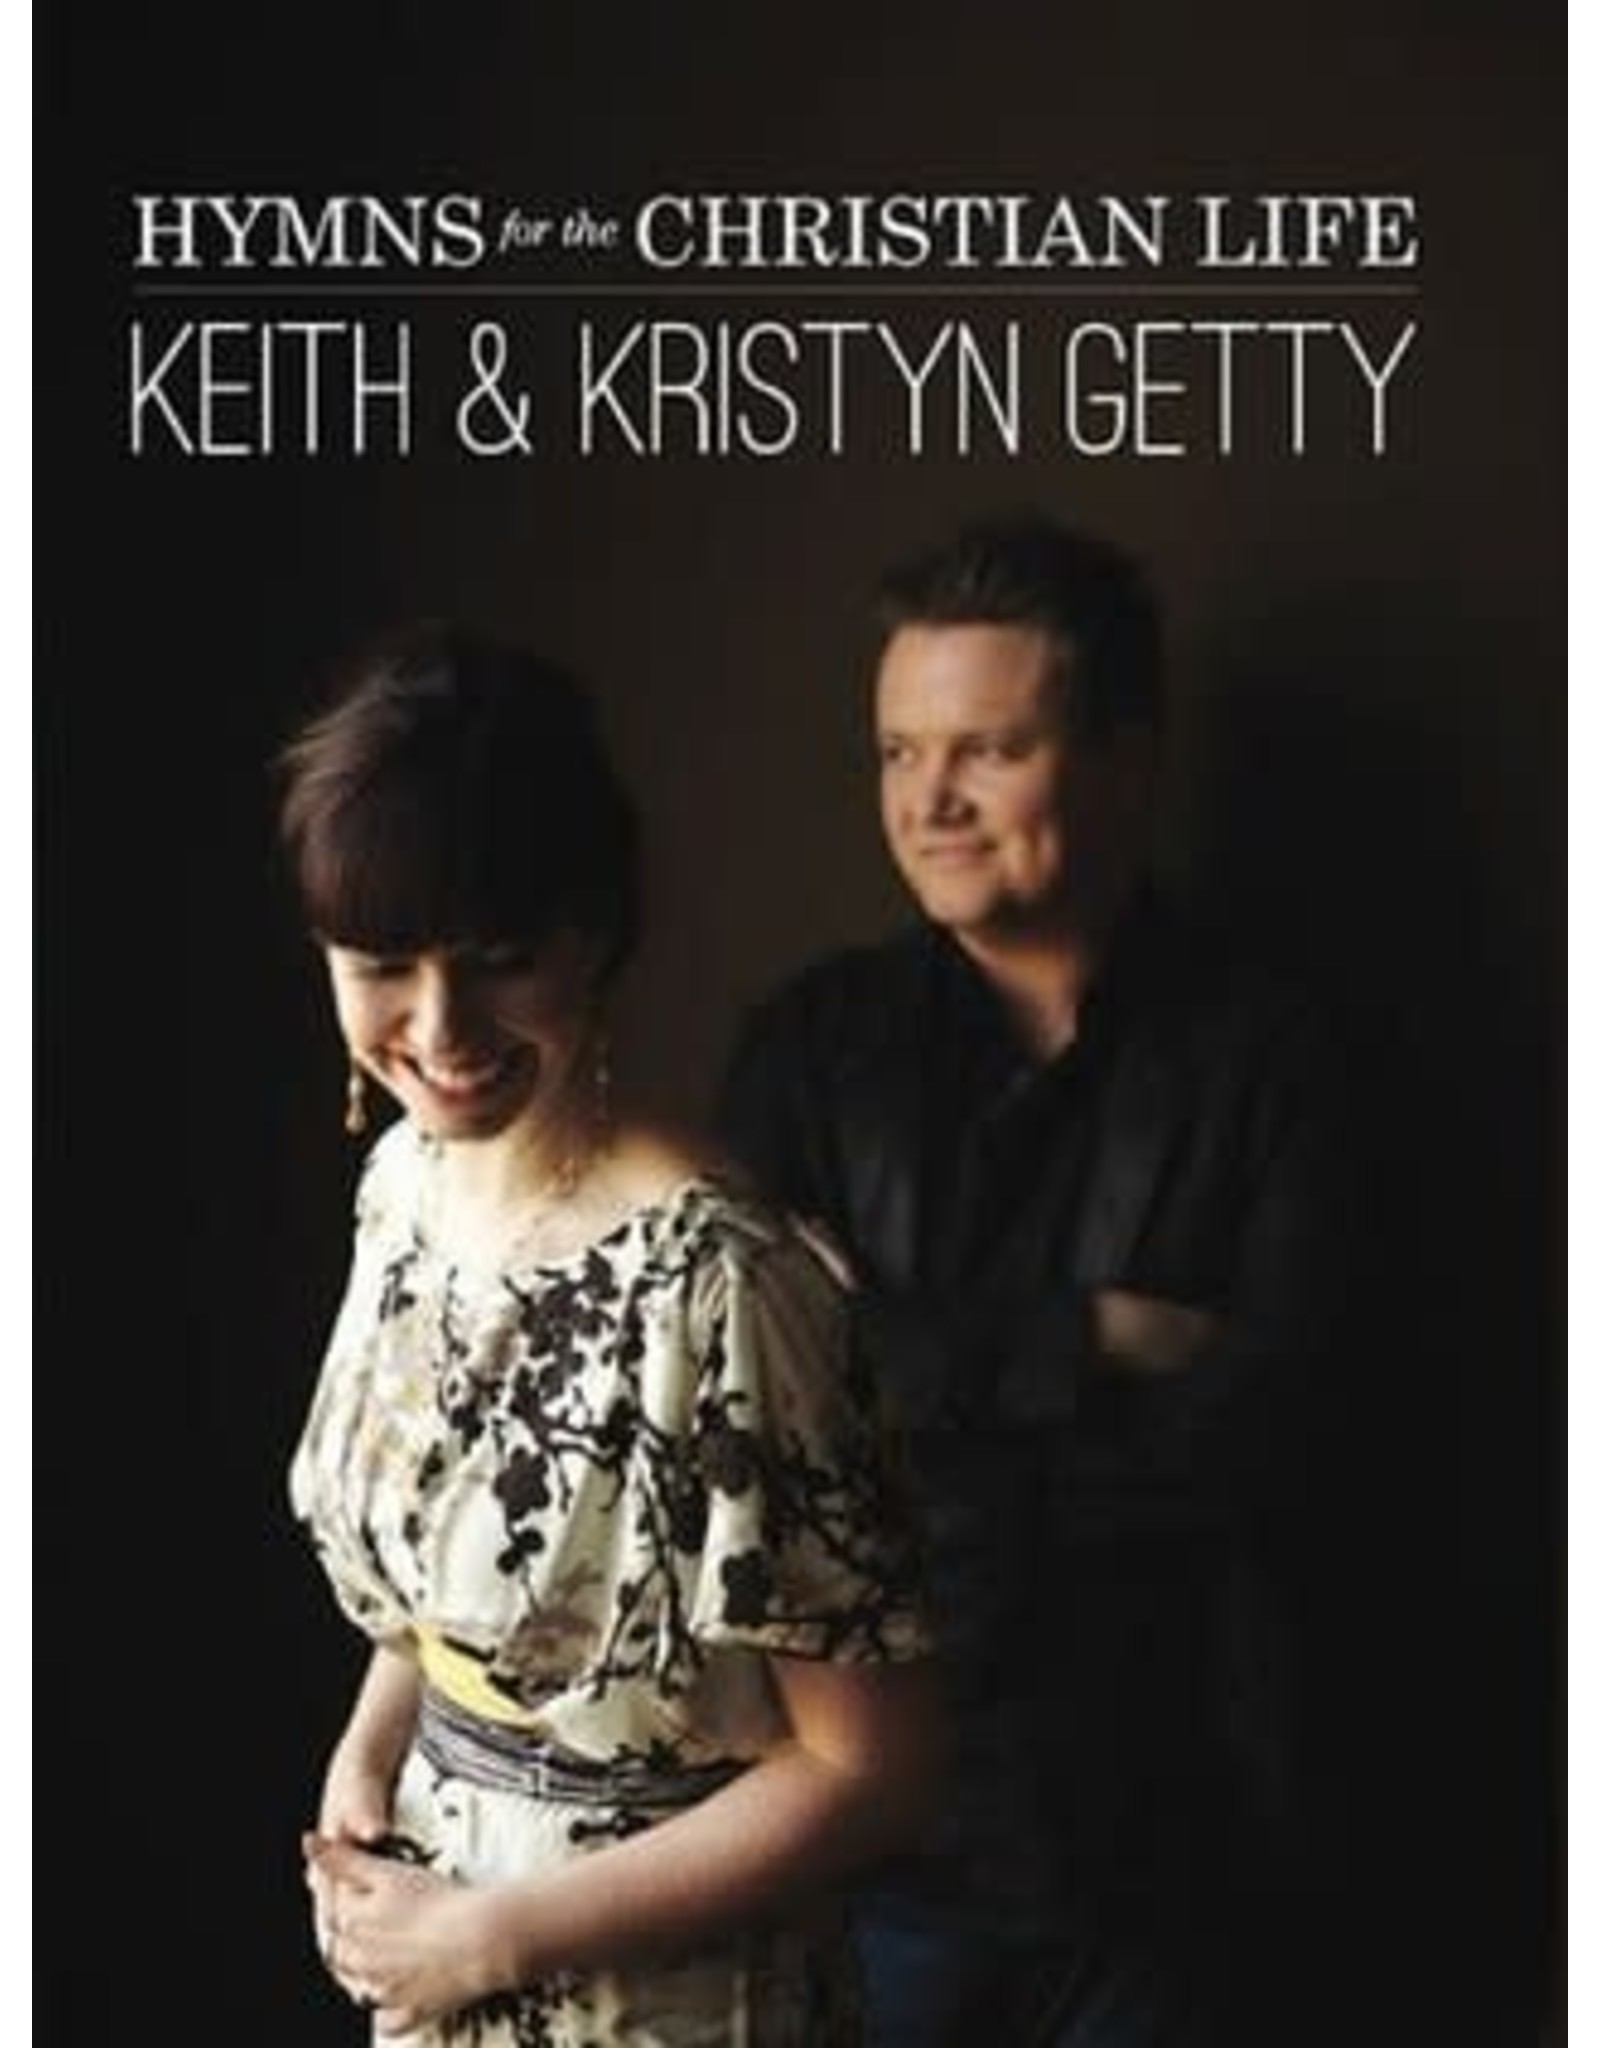 Getty Keith & Kristyn Getty: Hymns for the Christian Life